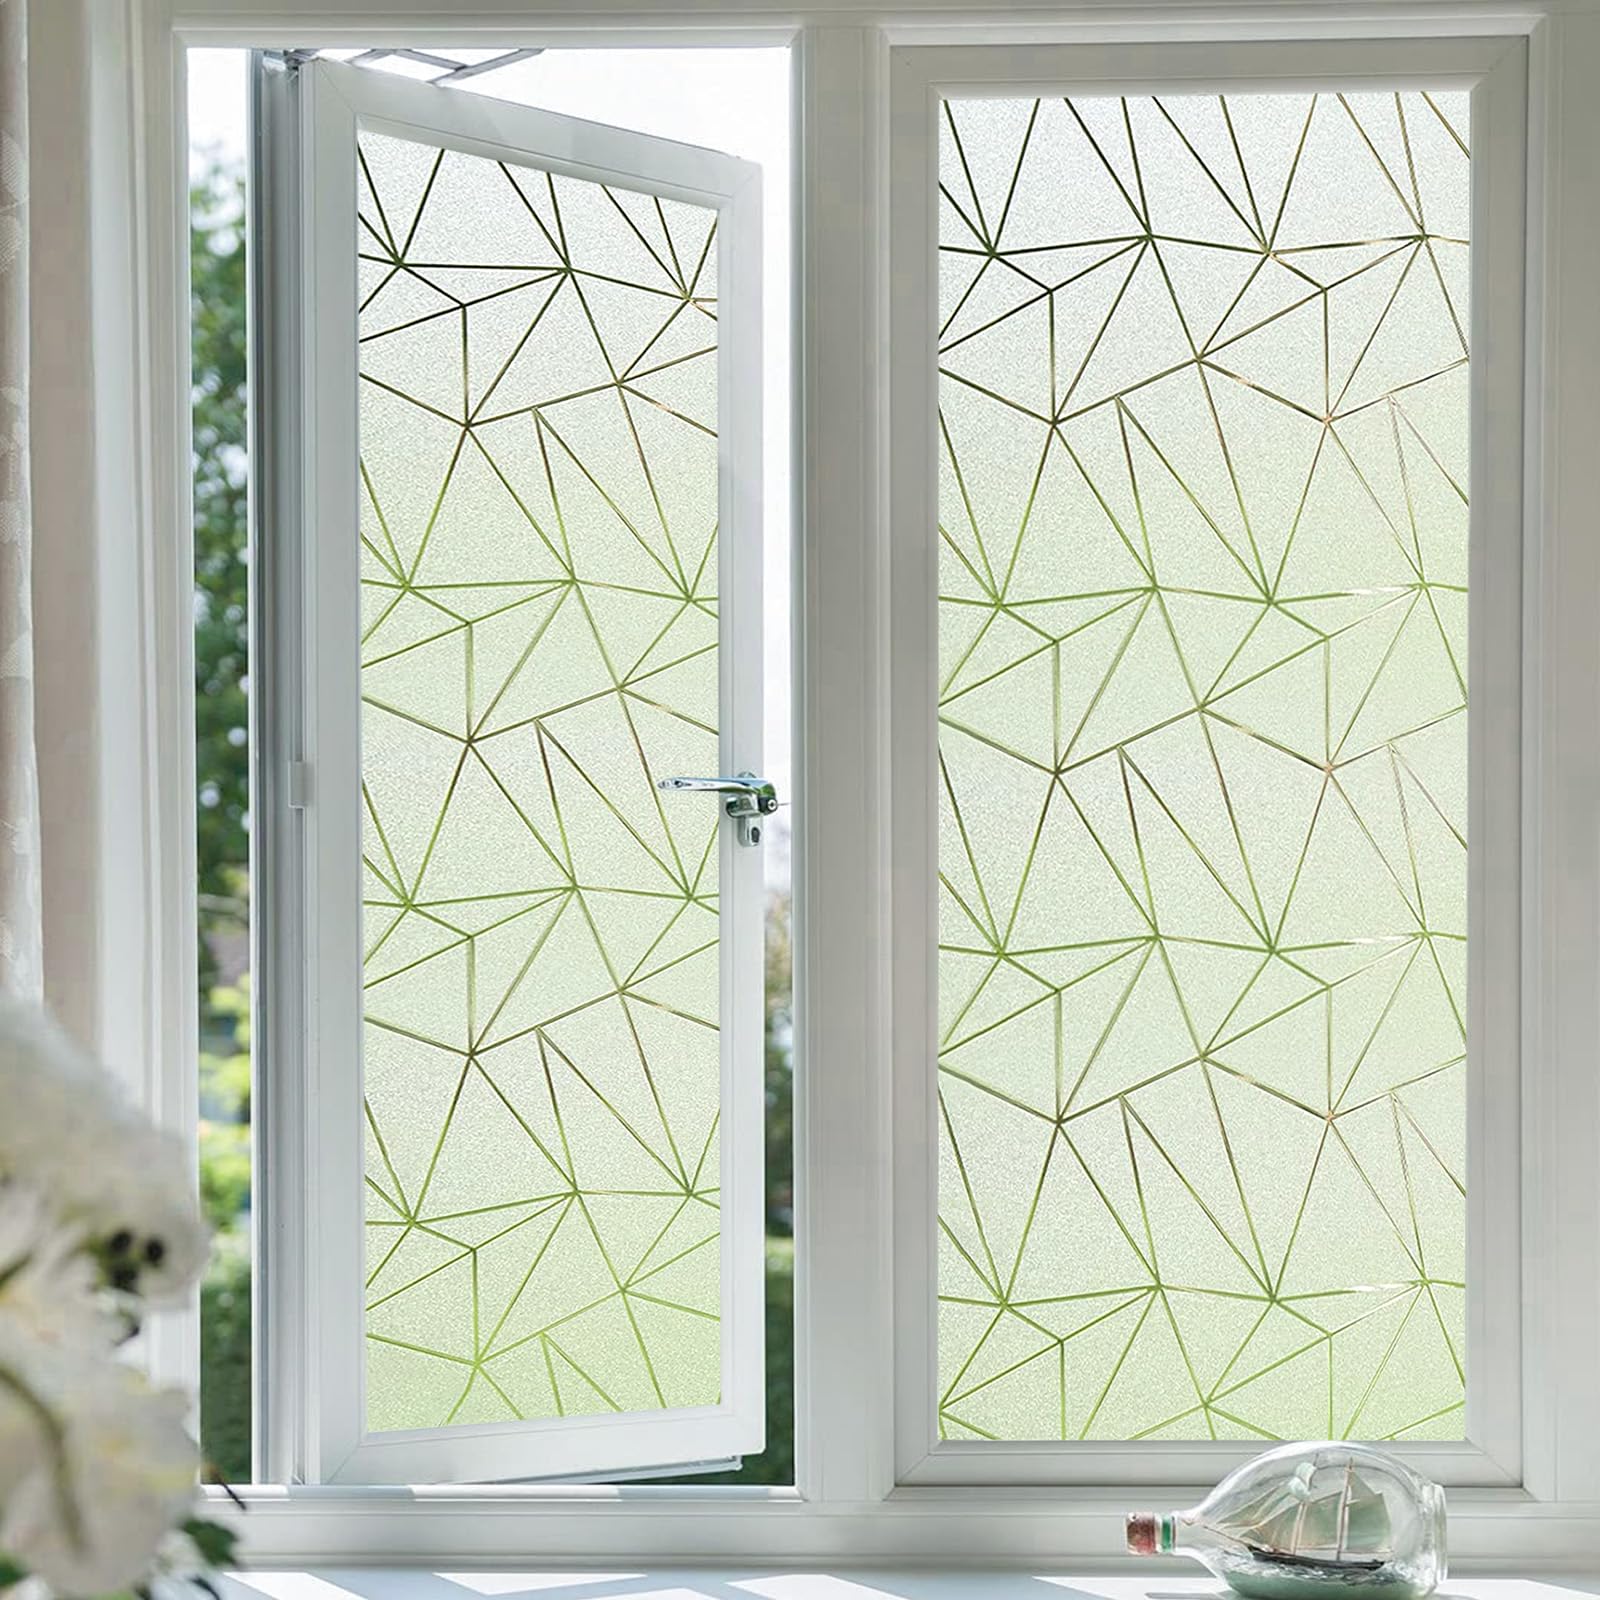 Windimiley Window Privacy Film Frosted Glass Window Clings Christmas Bathroom Home Window Tint Decorative Stained Glass Winter Window Stick